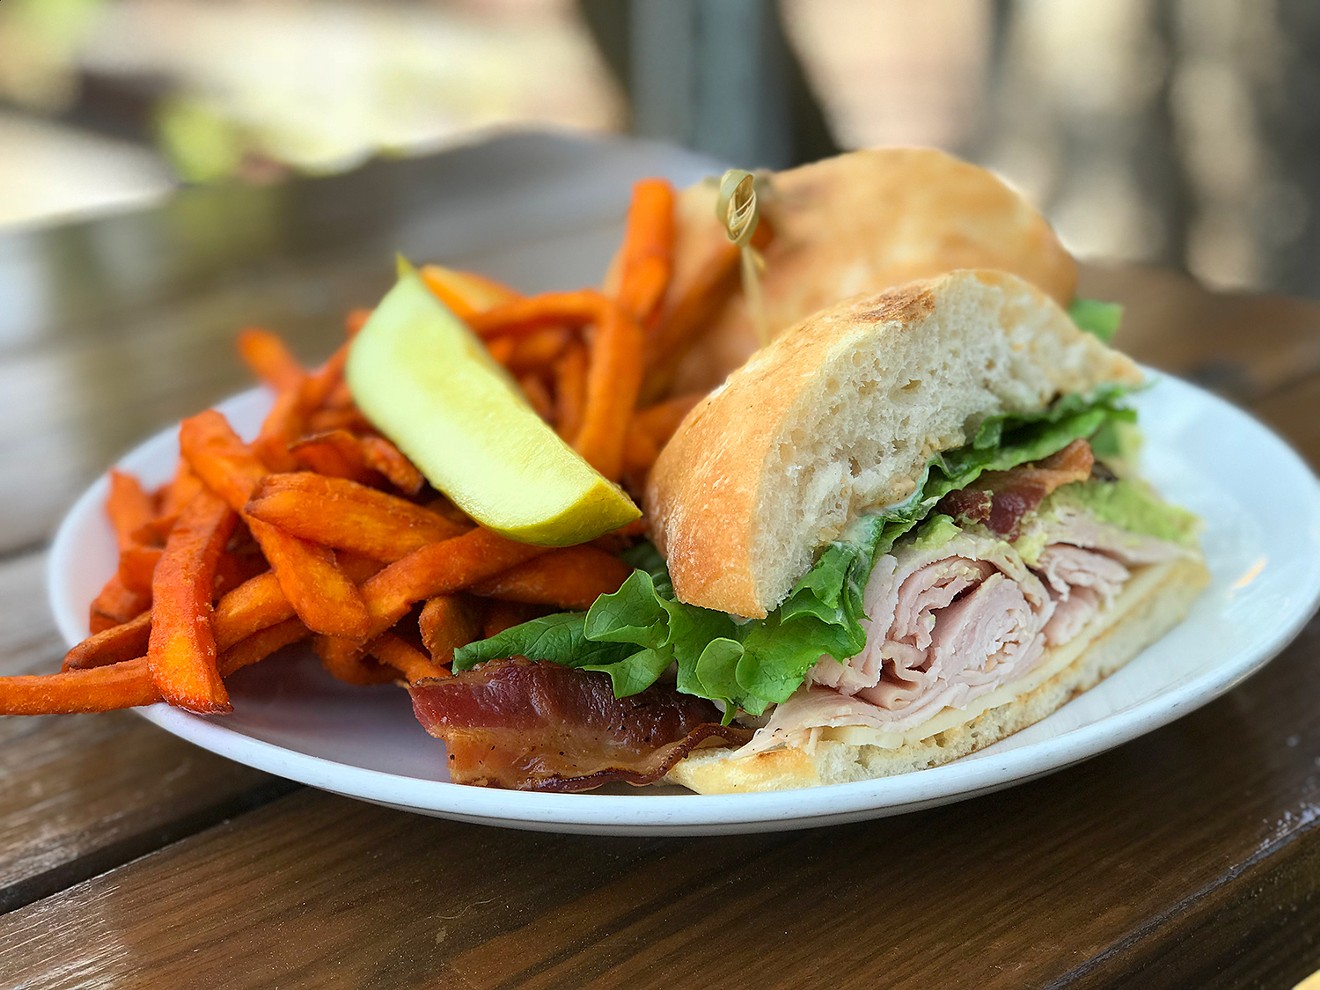 The smoked turkey at Onion Creeks seems like a simple turkey sandwich, but it's much more.